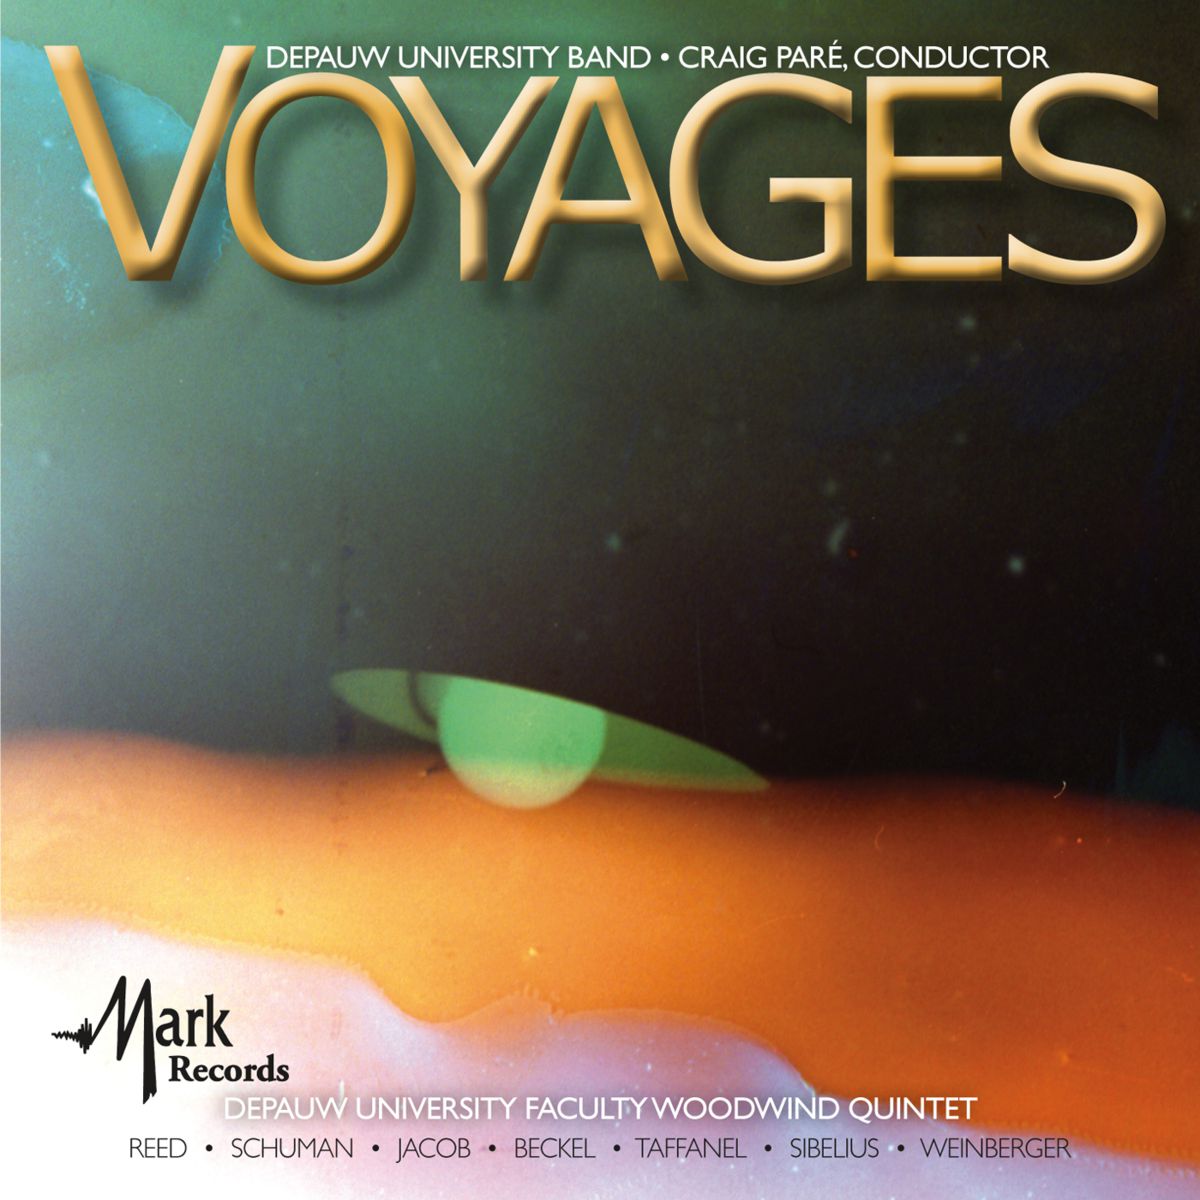 Voyages - click here